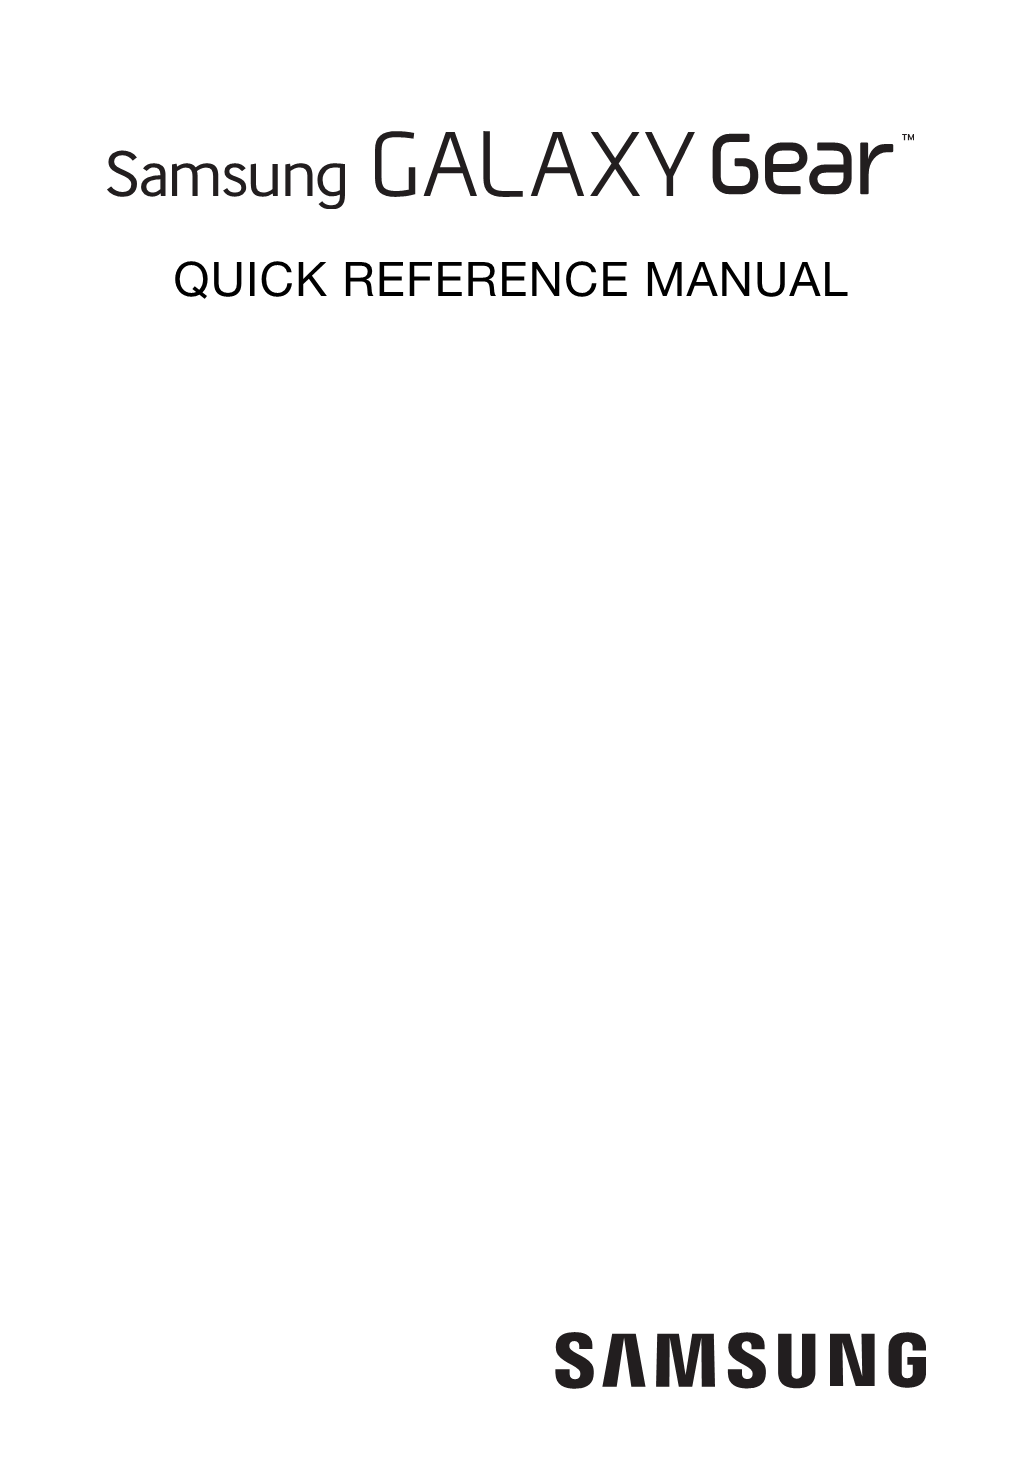 QUICK REFERENCE MANUAL Support This Guide Provides You with the Information You Need to Get Started